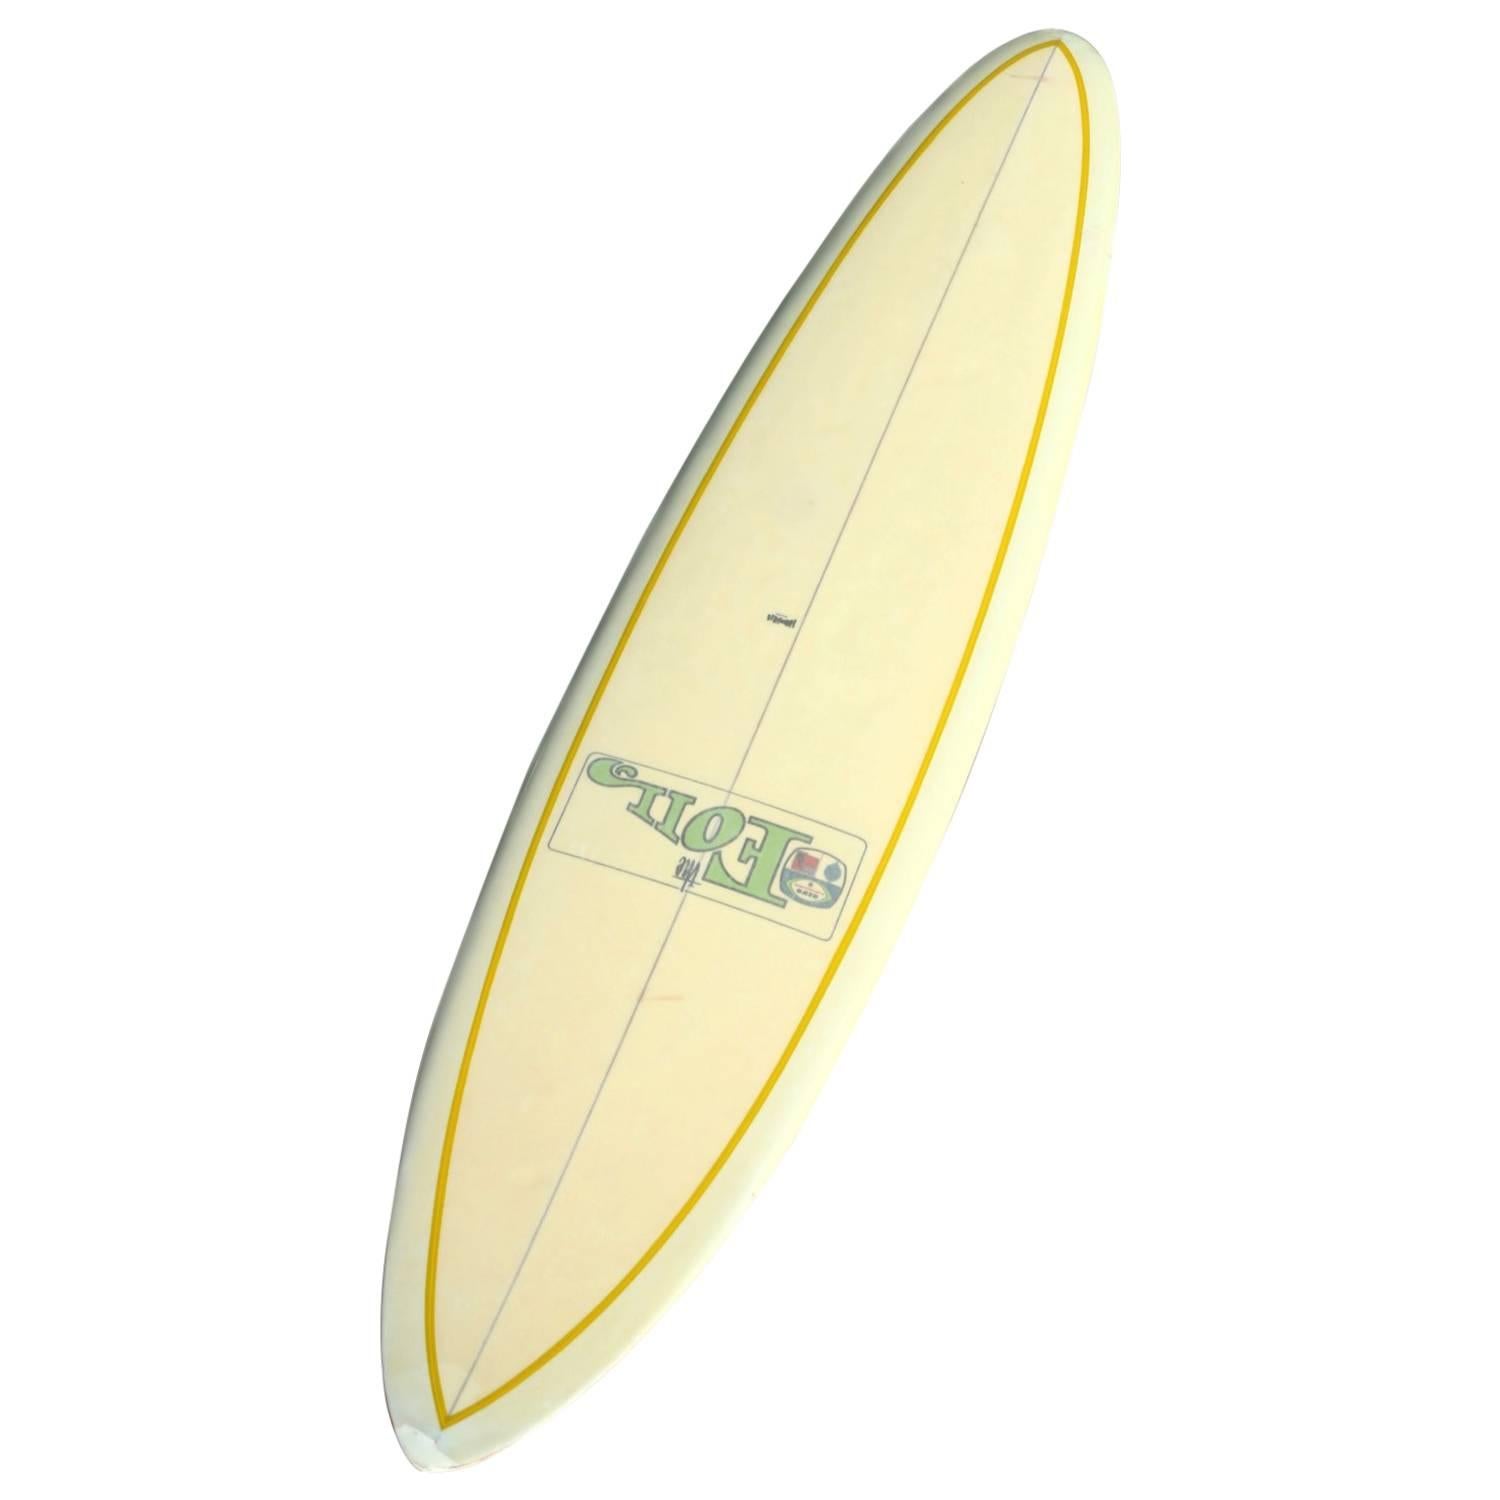 Original clear deck Bing Foil Hawaii Surfboard with glassed in fin, circa 1965 For Sale